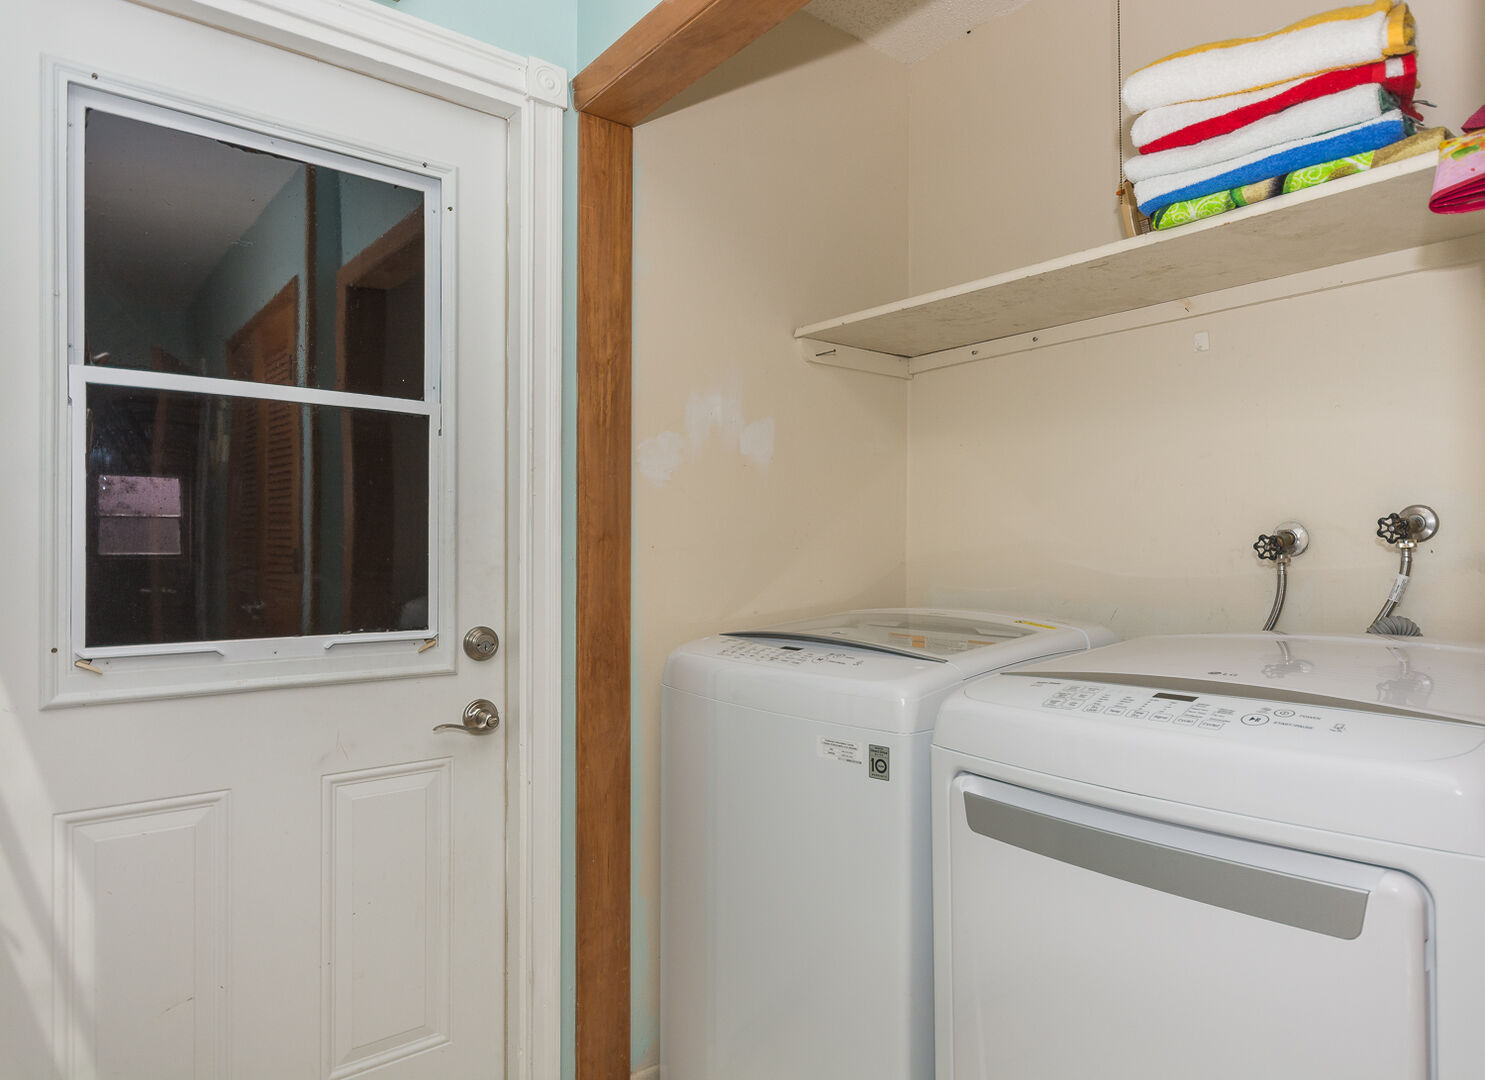 Full sized washer and dryer. and access to the garage.